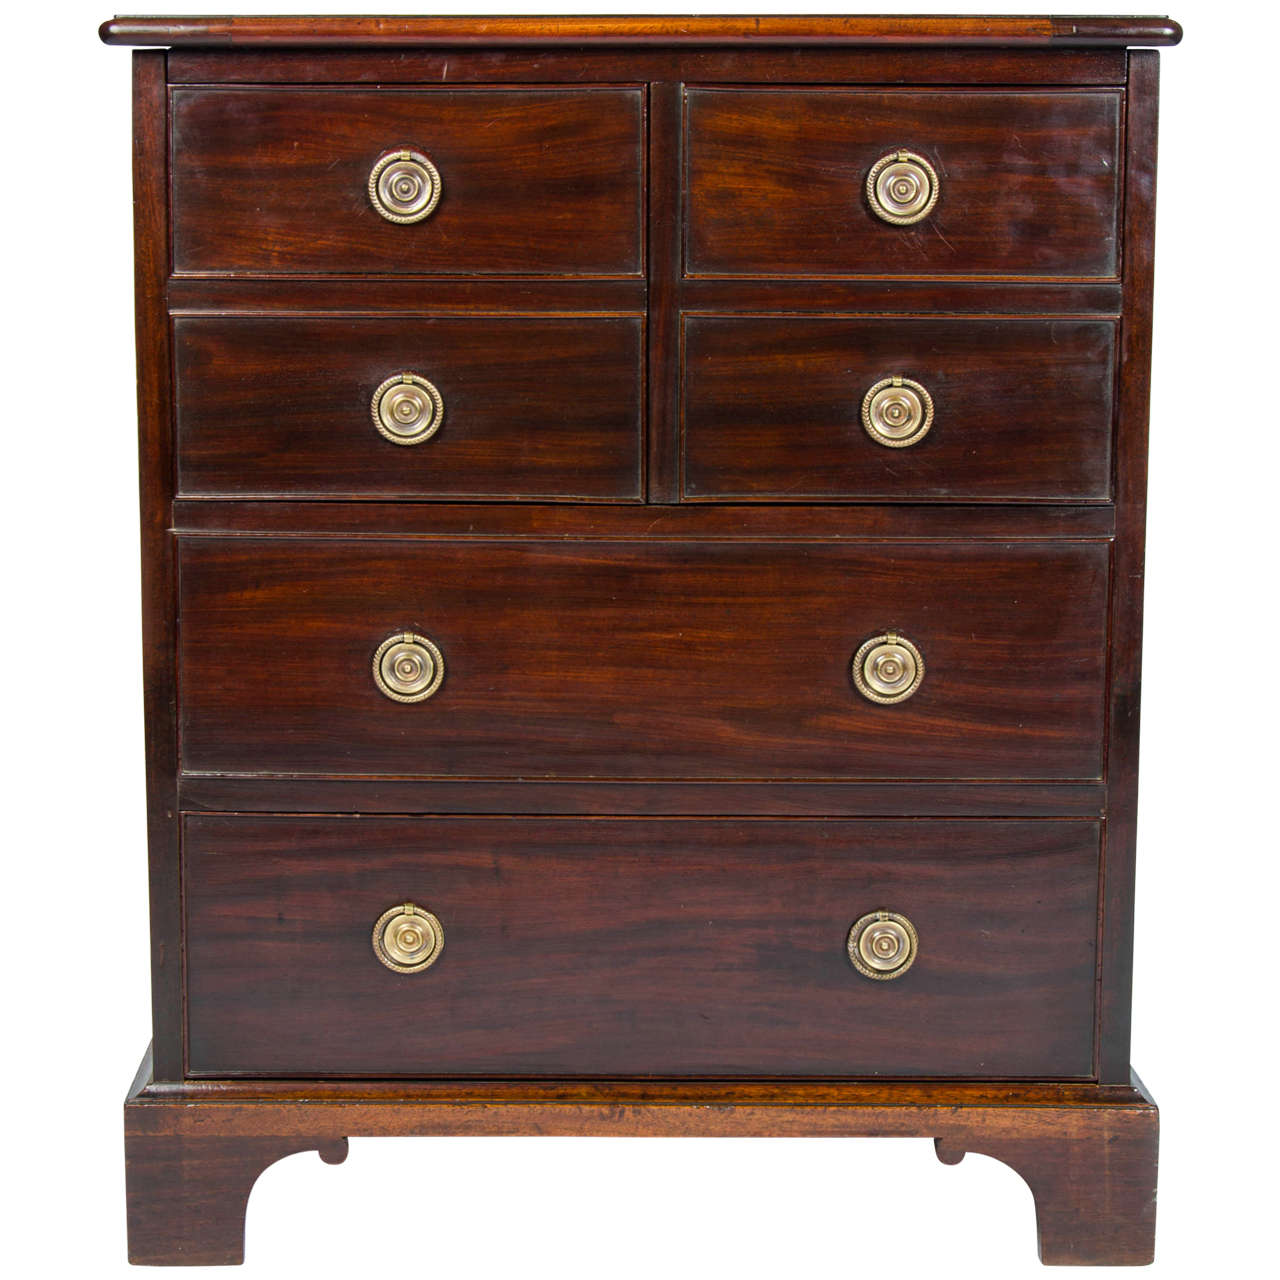 George III period late 18th century Mahogany Commode in original condition For Sale